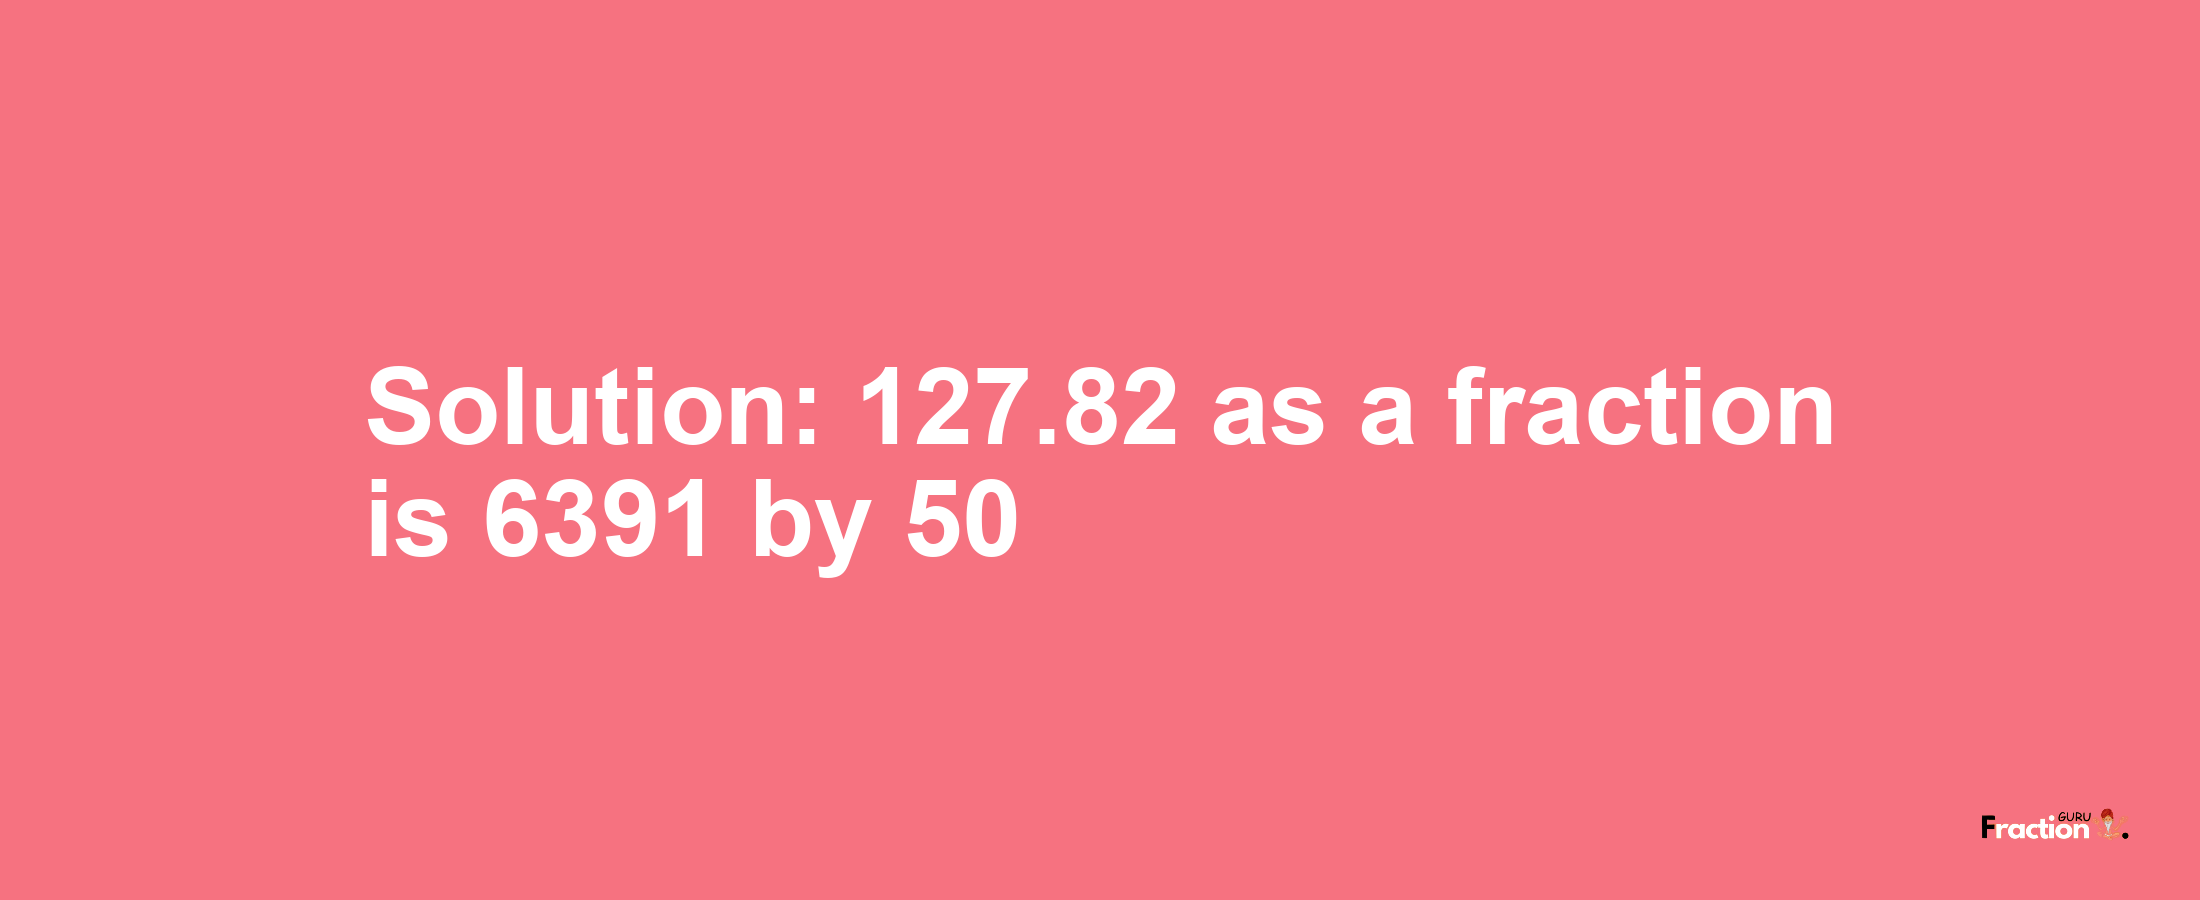 Solution:127.82 as a fraction is 6391/50